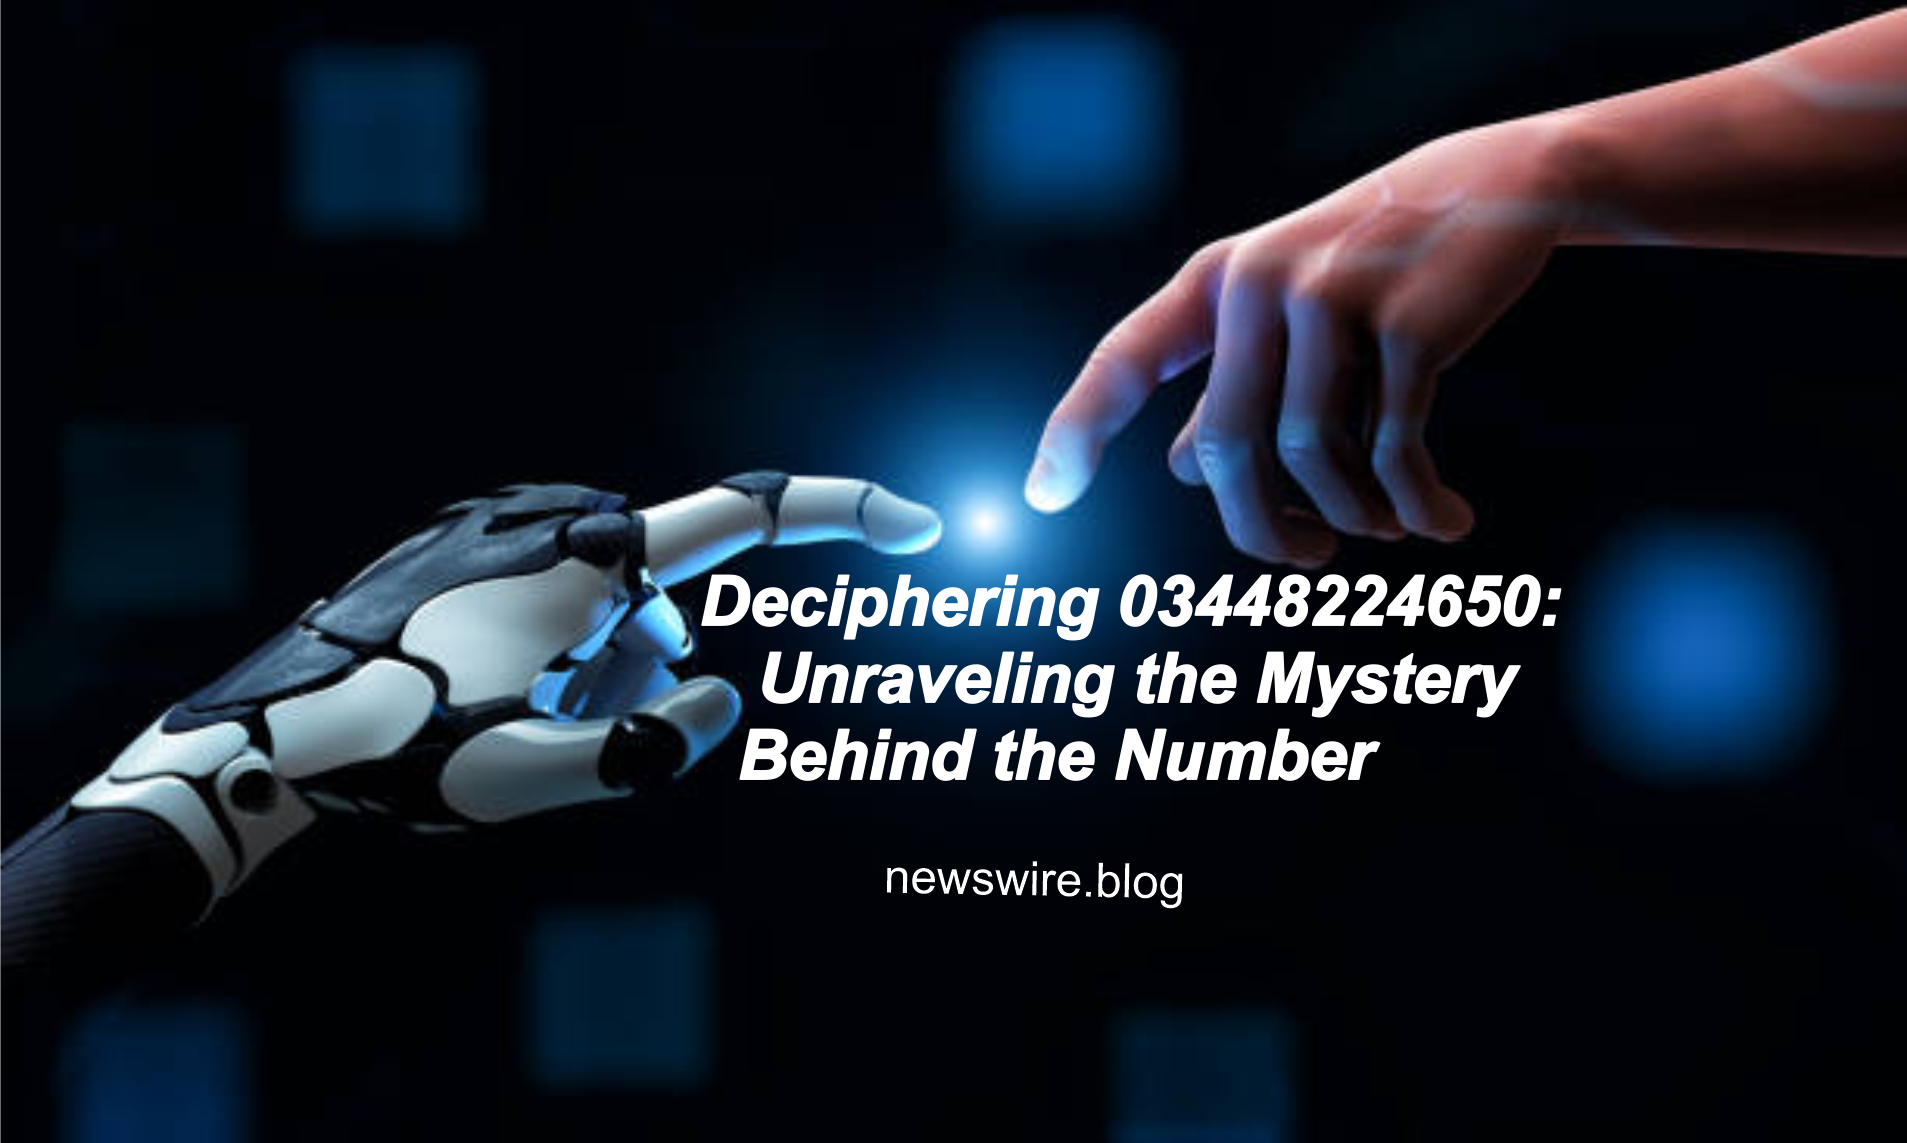 Deciphering 03448224650: Unraveling the Mystery Behind the Number